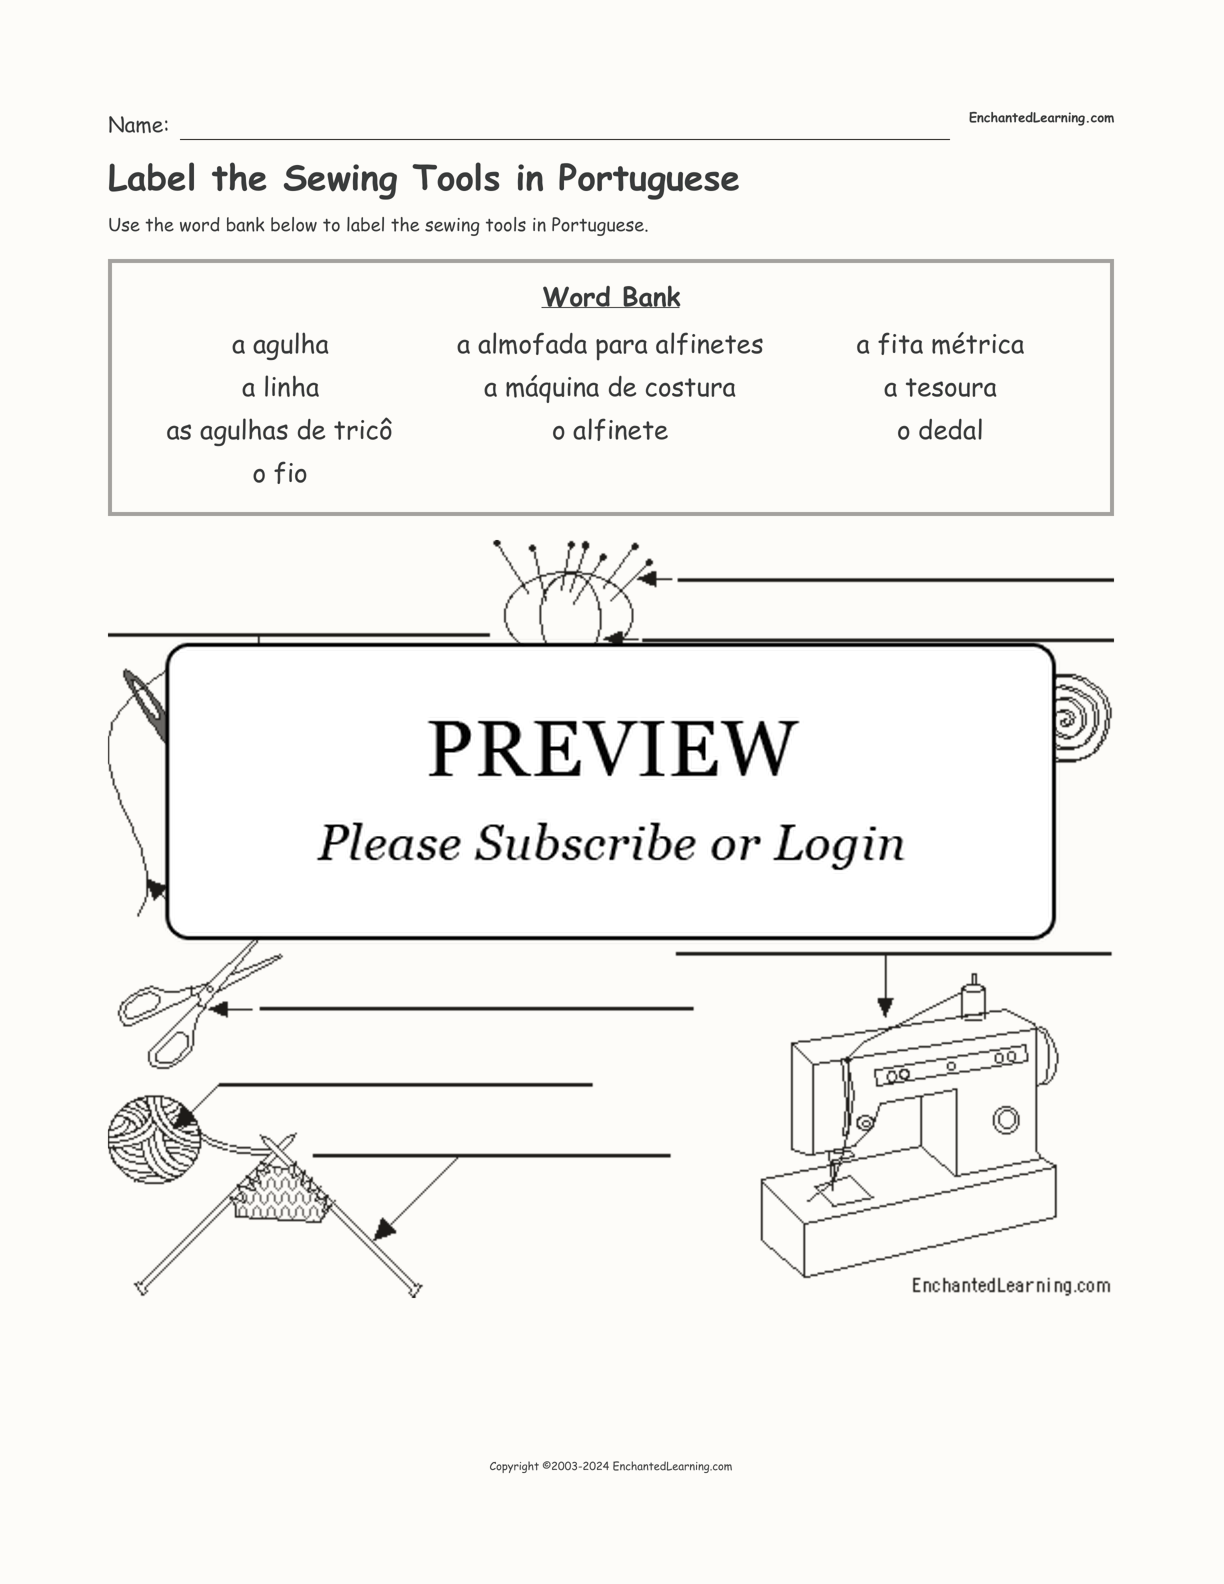 Label the Sewing Tools in Portuguese interactive worksheet page 1